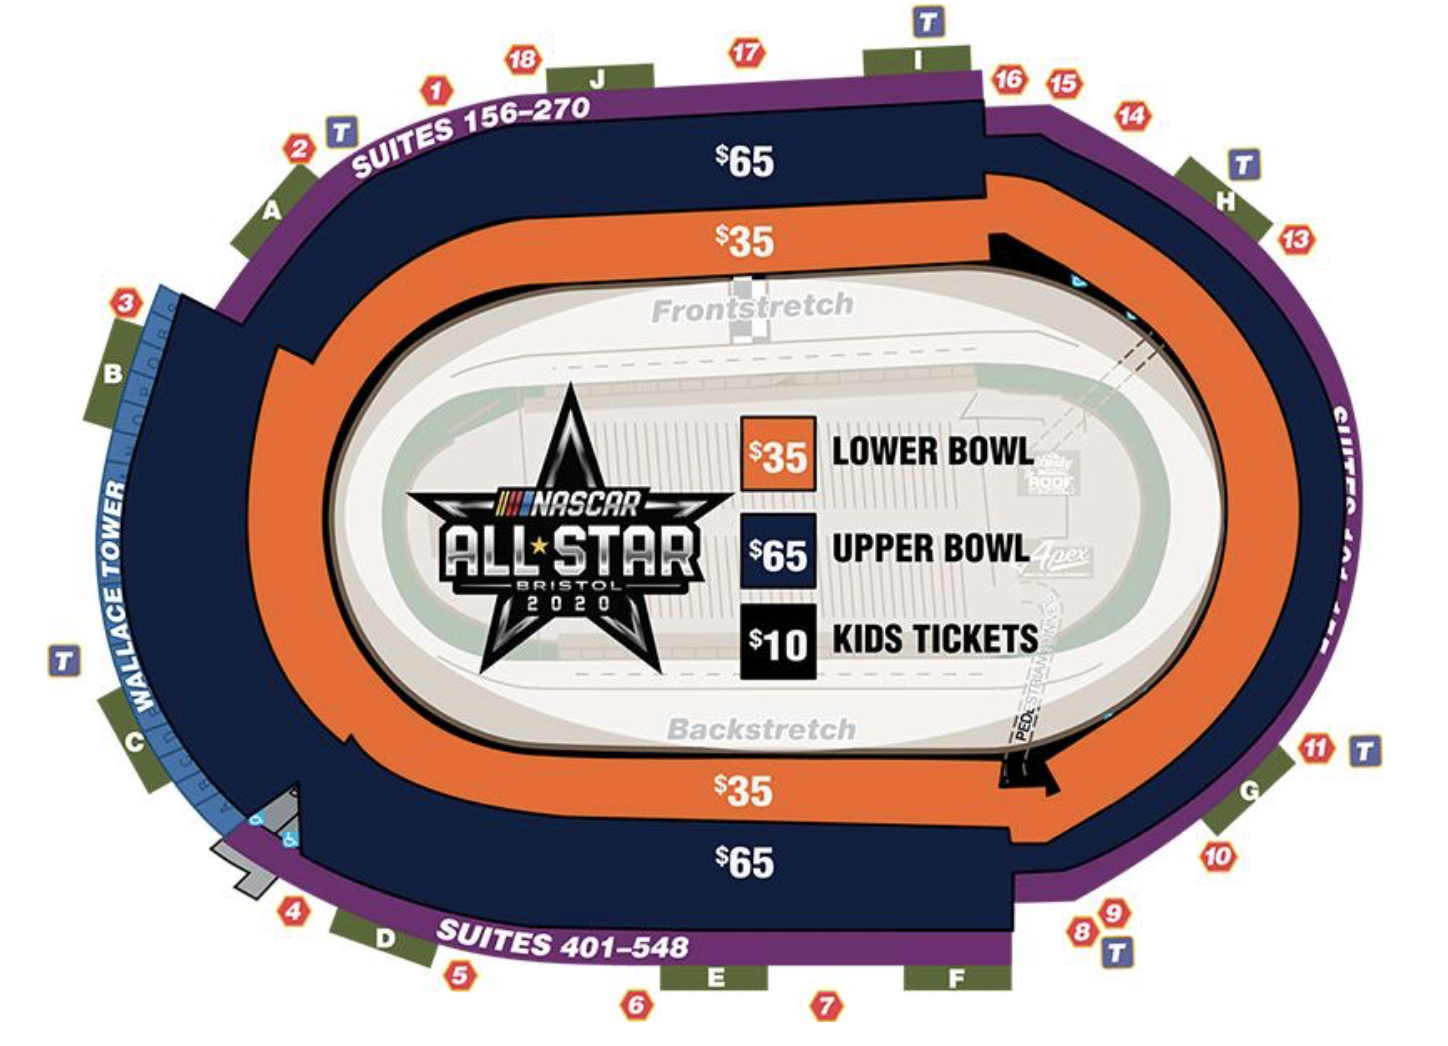 How To Find Cheapest 2020 NASCAR All-Star Race Tickets + Face Value Options